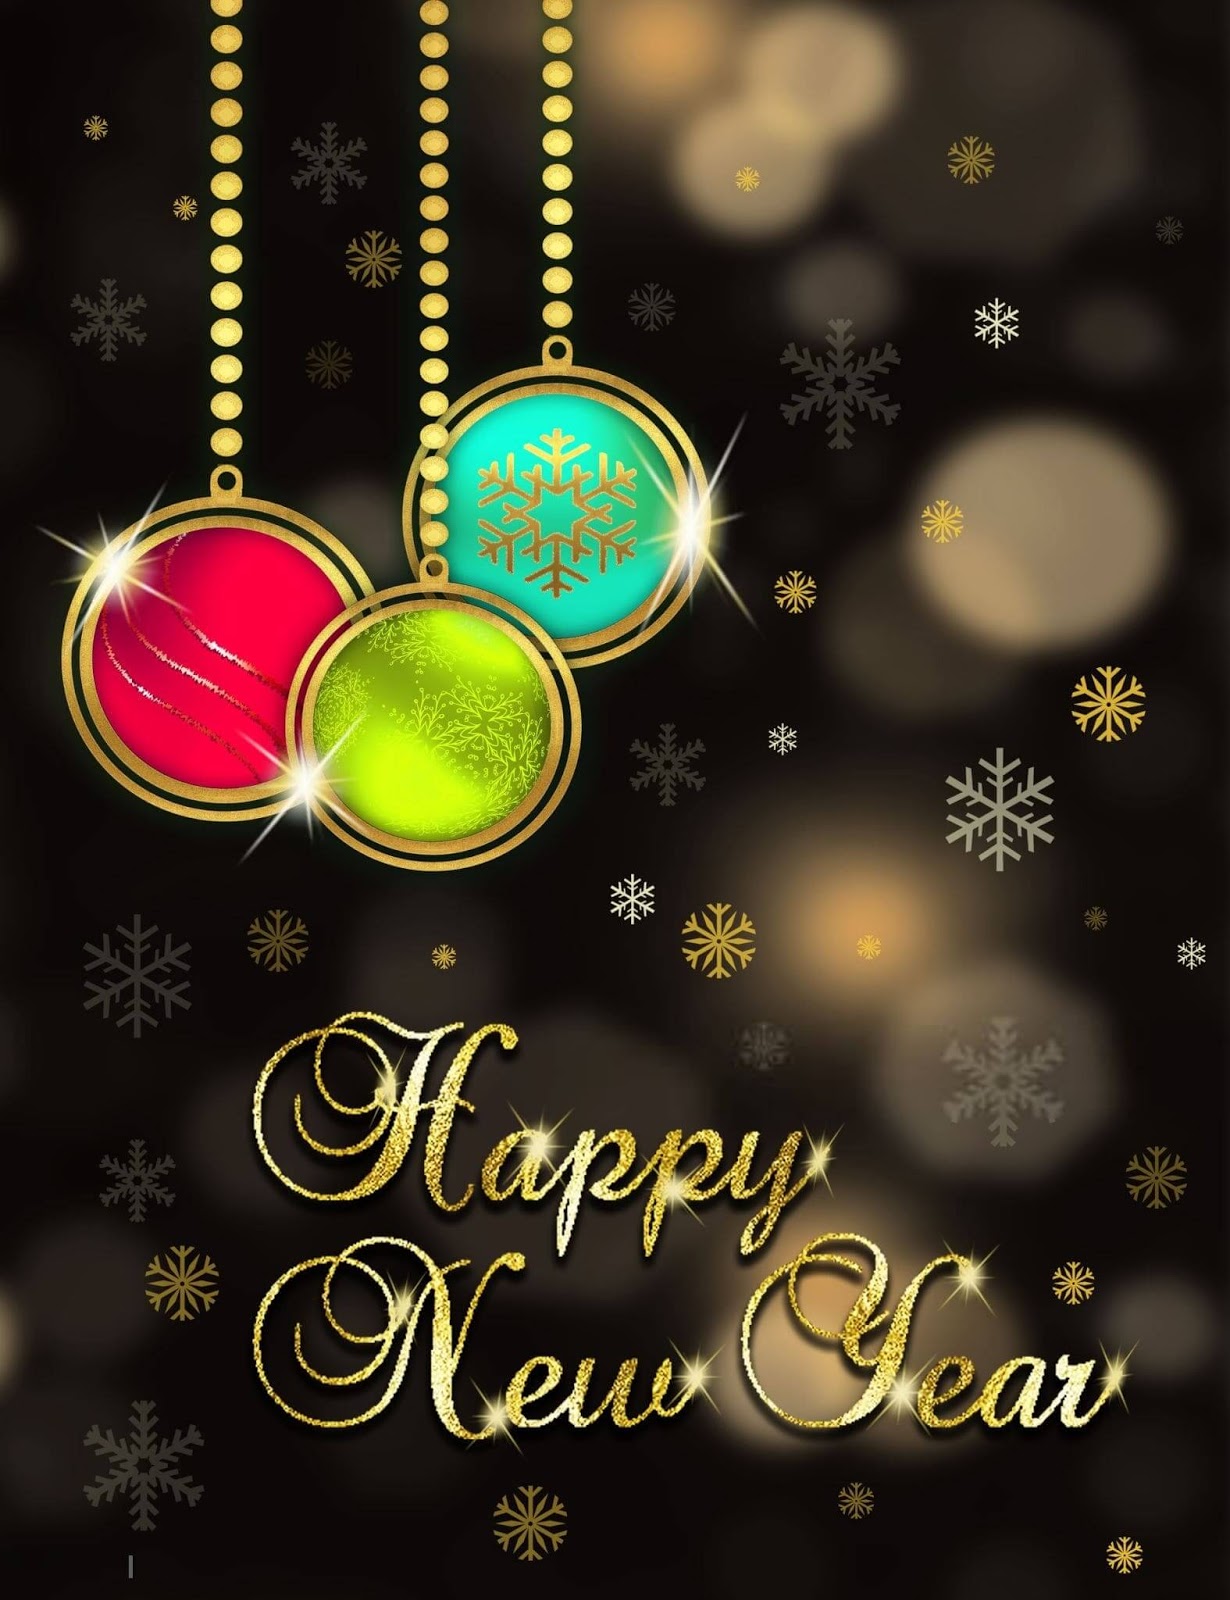  Happy  New  Year  2021 HD  Wallpaper  Images Download  Free 